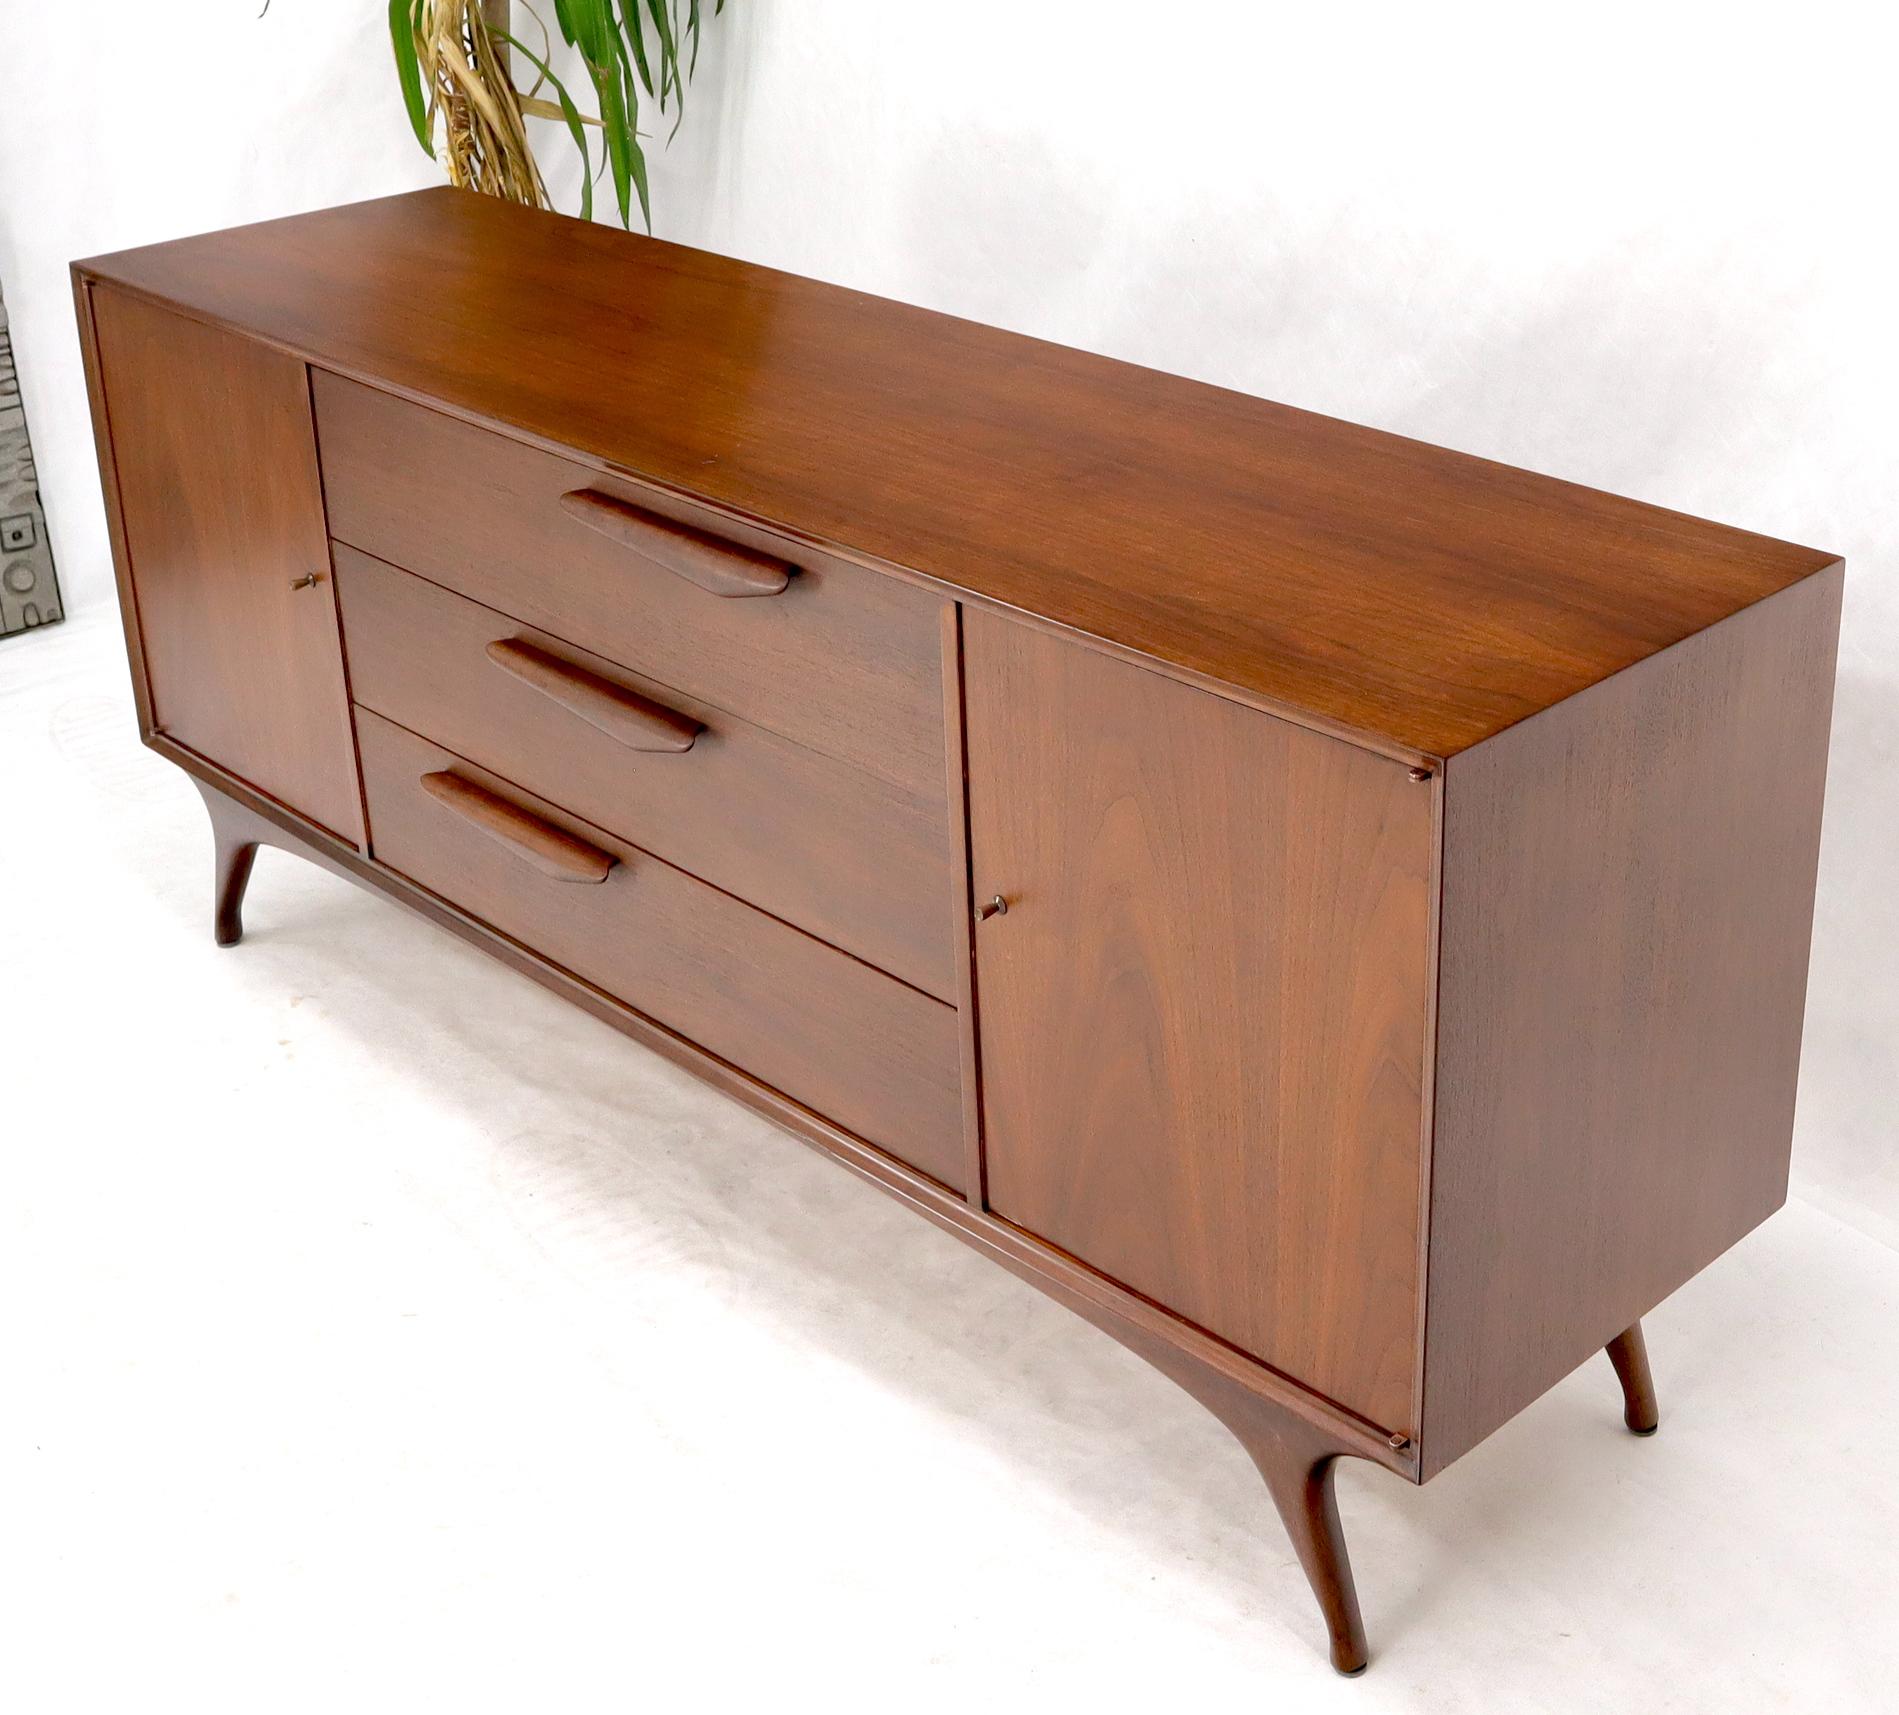 Mid-Century Modern Sculptural Legs Long 9 Drawers Walnut Credenza Dresser with Doors For Sale